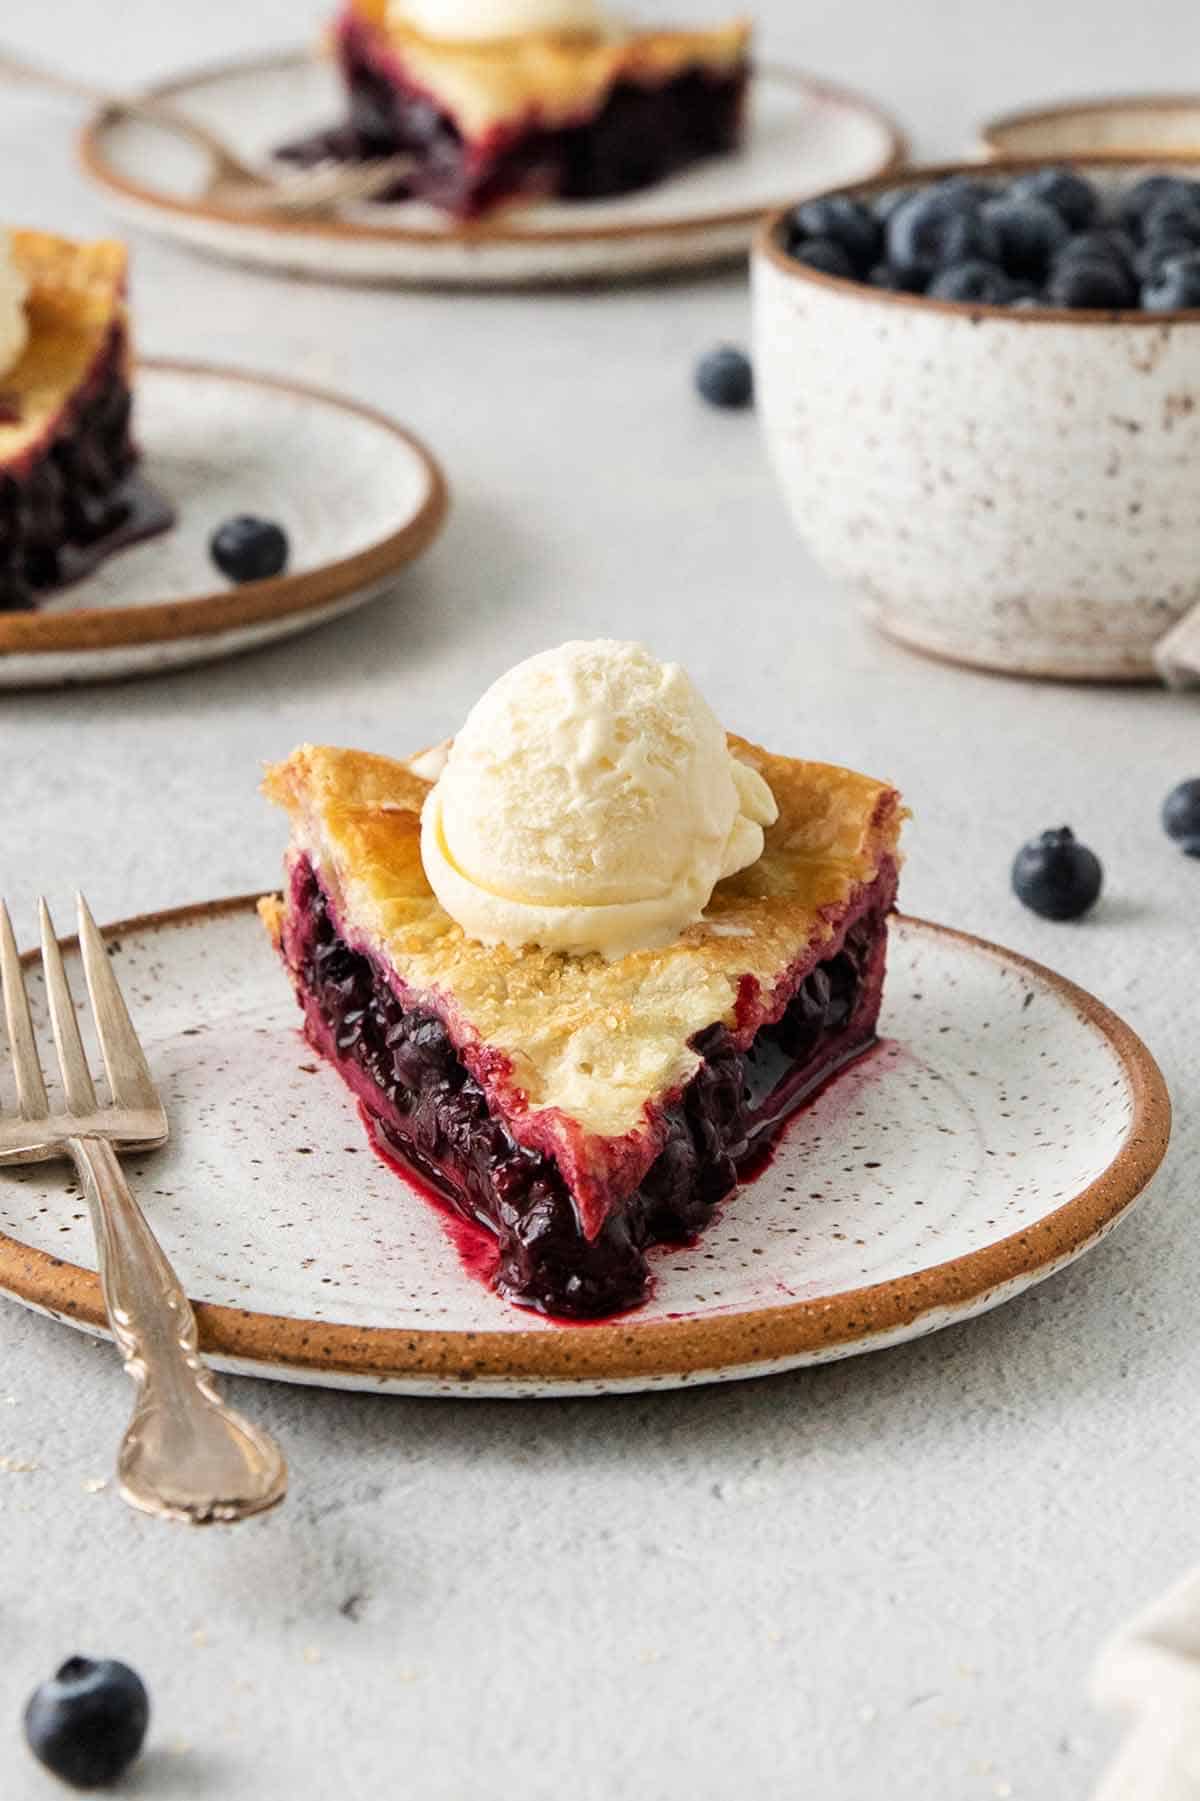 Easy Blueberry Pie made with puff pastry dough